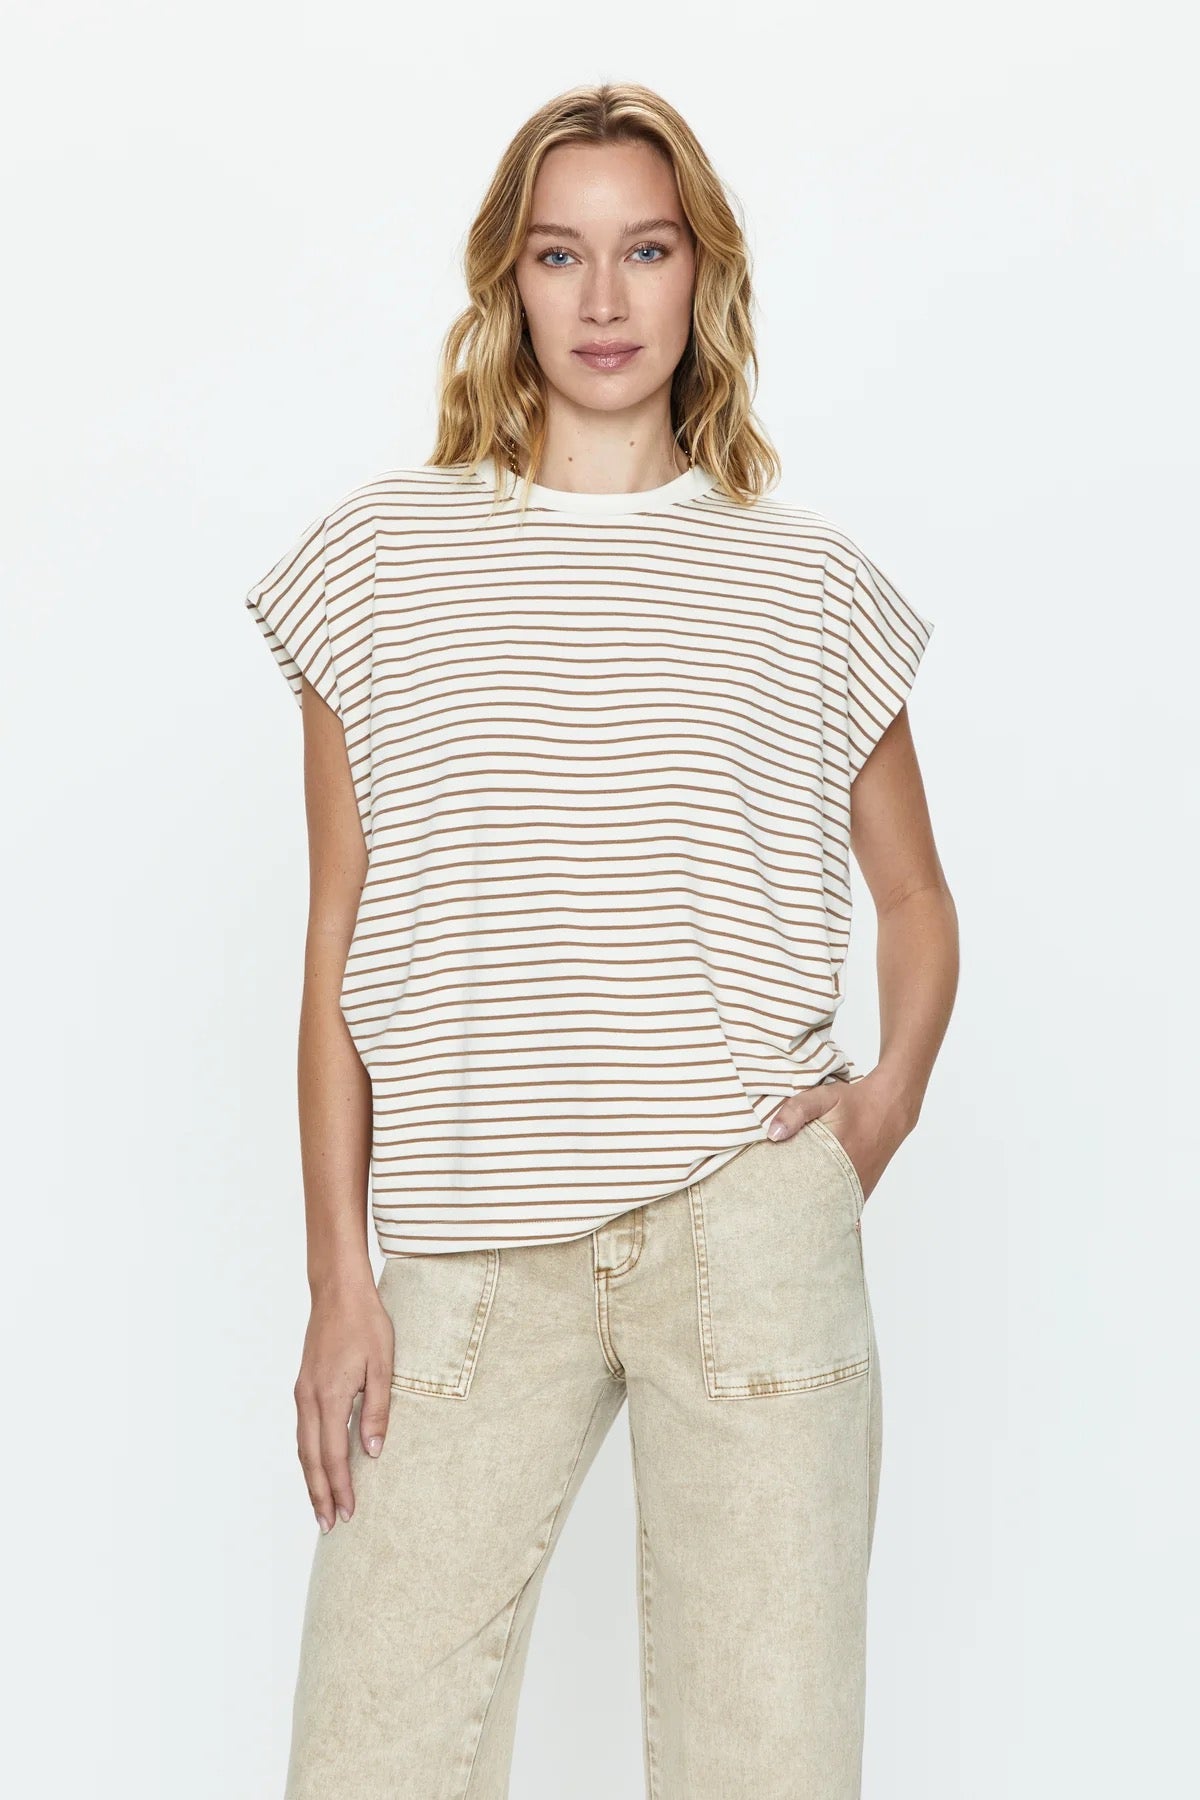 Trina Muscle Tee in Sable Stripe by PISTOLA